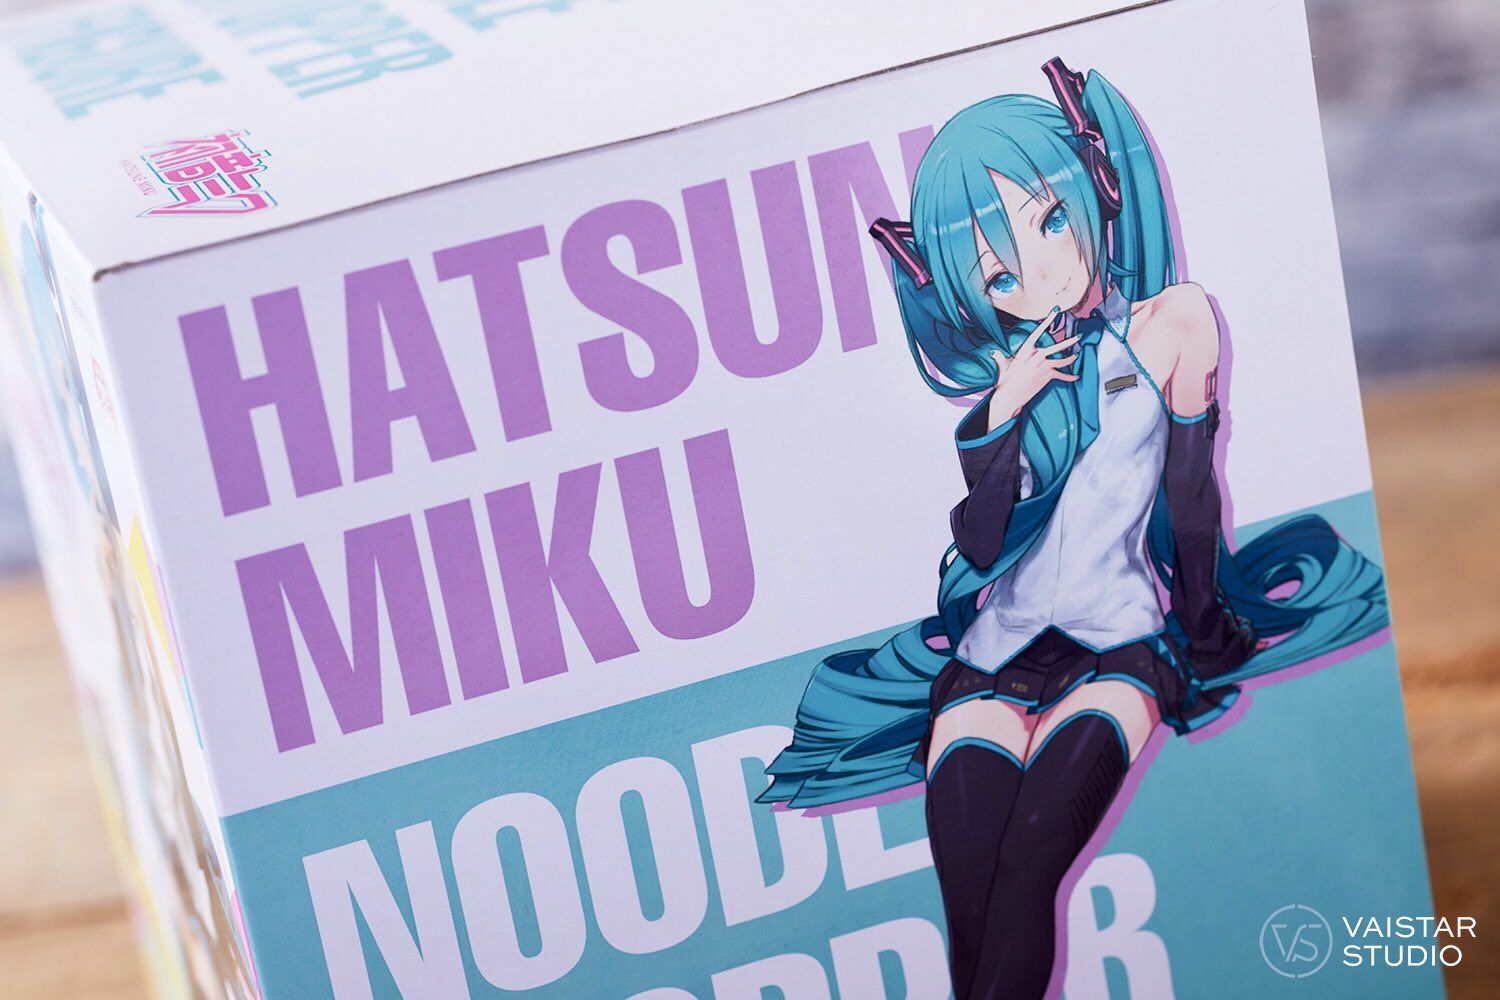 [Hatsune Miku] Nuyoru Stopper Figure, too much color and become a topic erotic 17